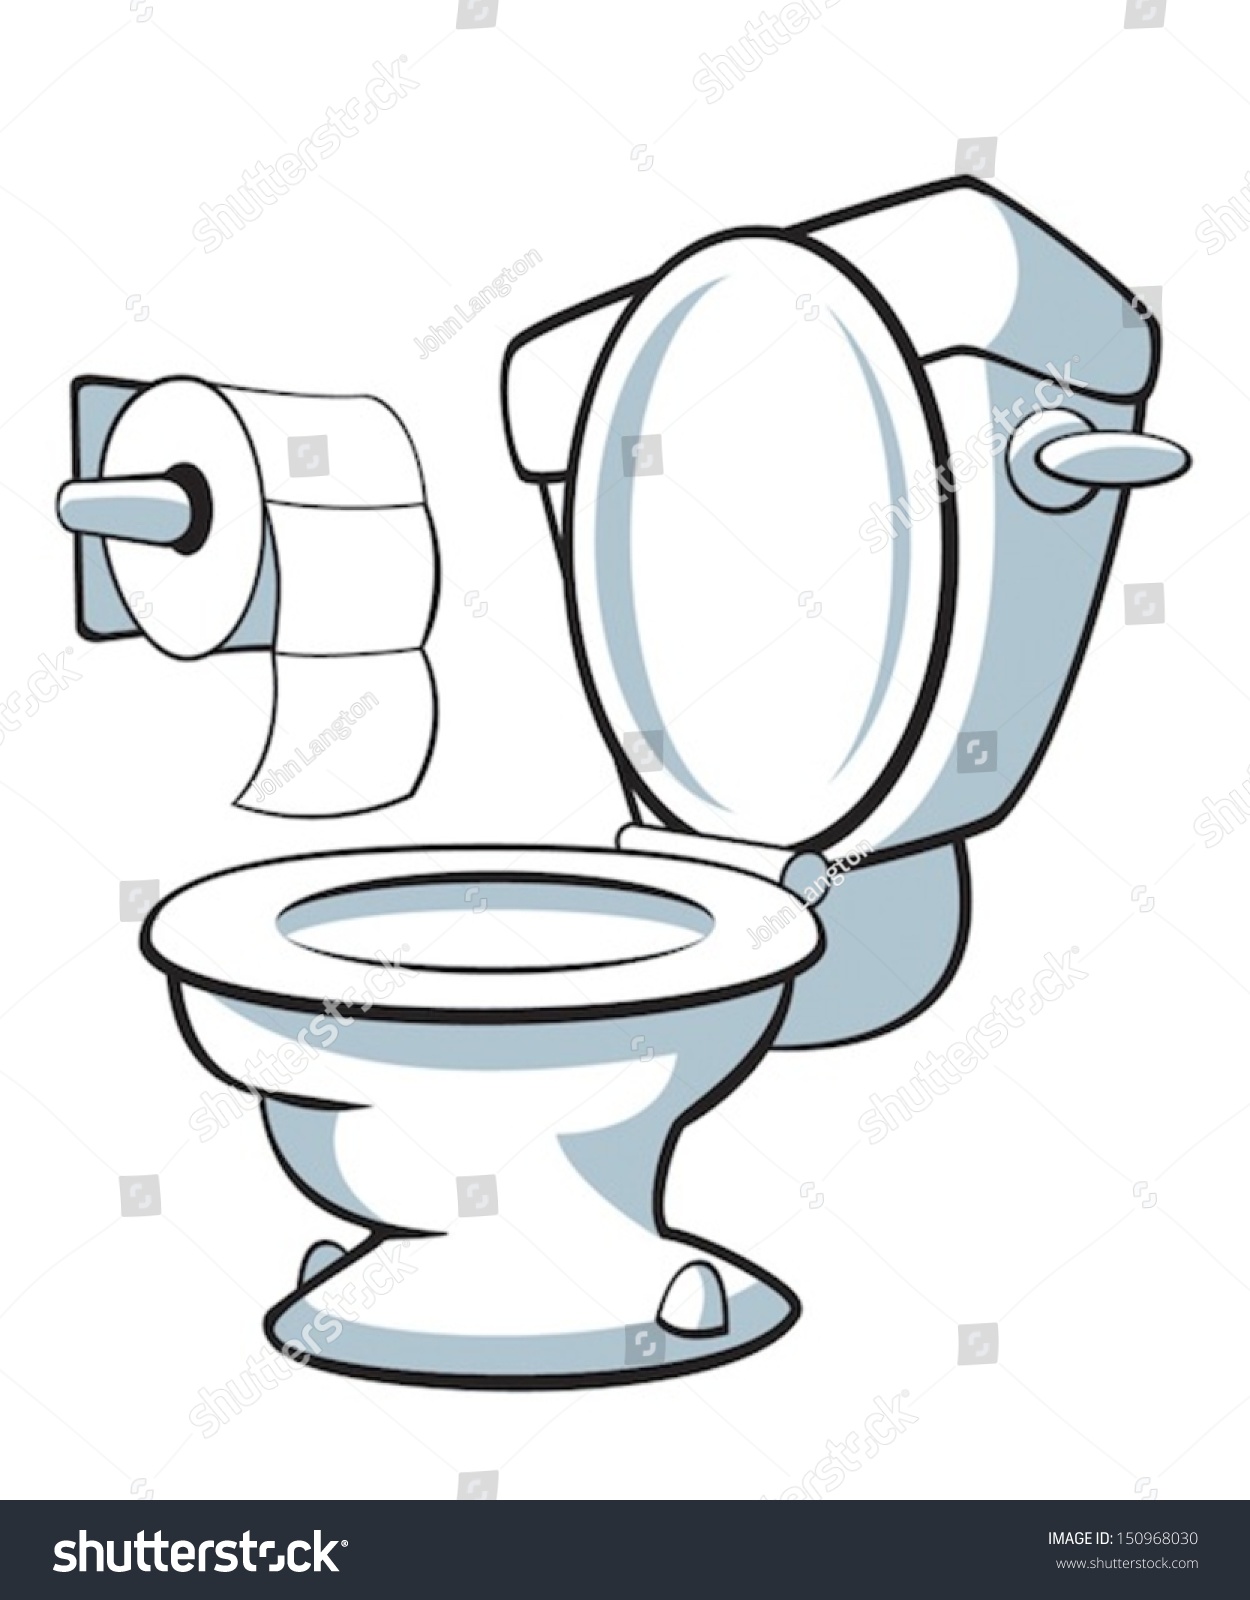 toilet cleaning clipart - photo #26